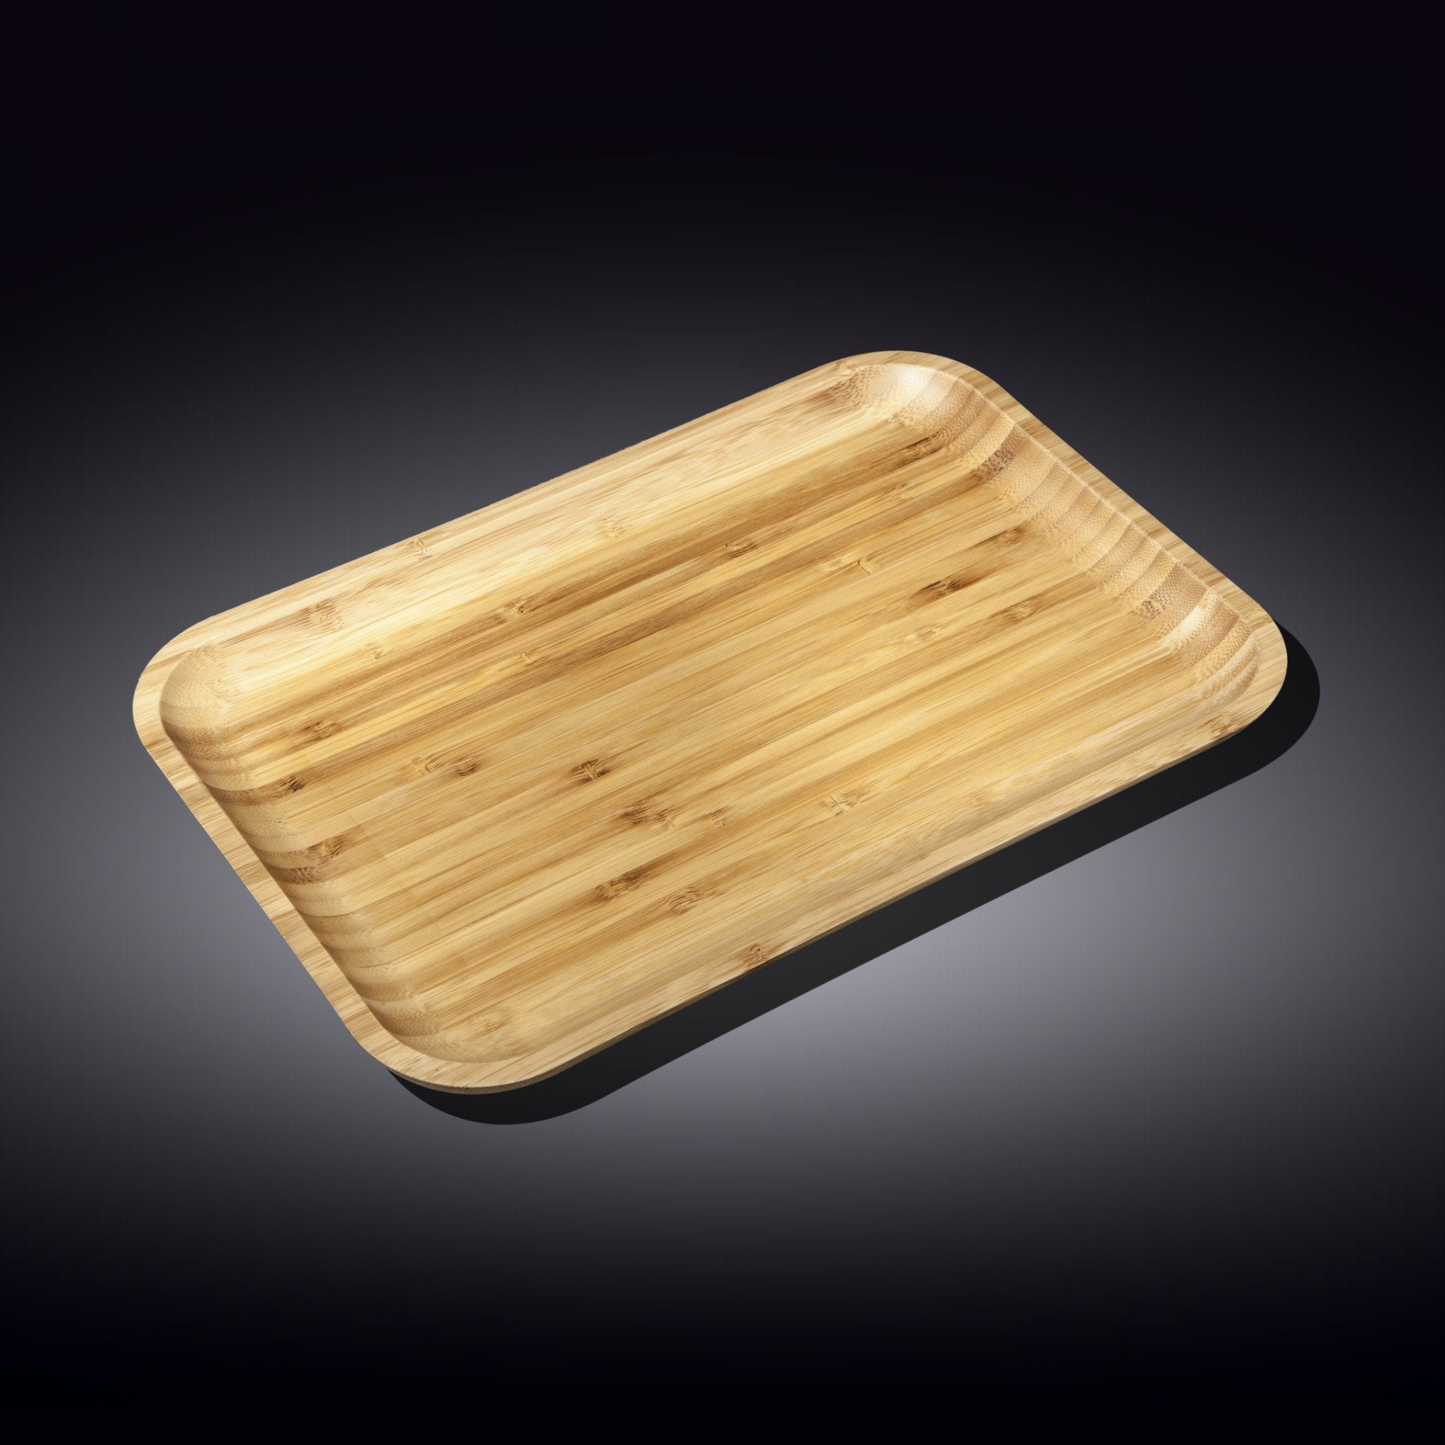 Wilmax Bamboo Wood Dish 11" X 7" | For Appetizers / Barbecue / Burger Sliders  WL-771053/A